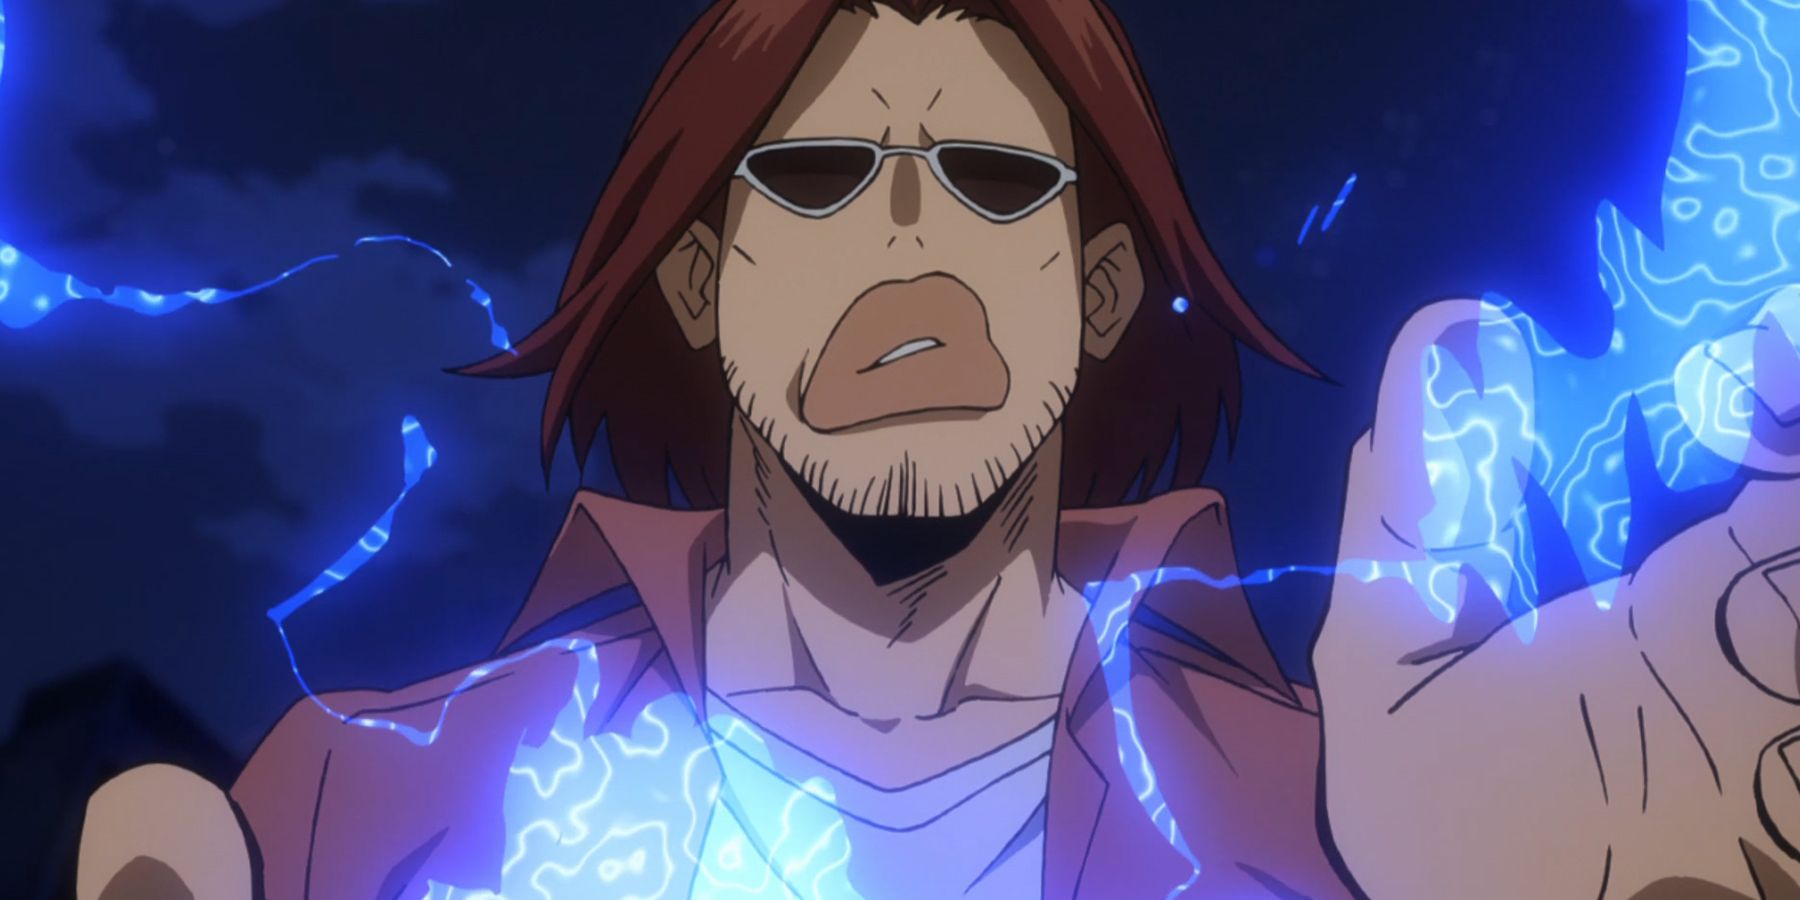 Magne conjures electricity in My Hero Academia.